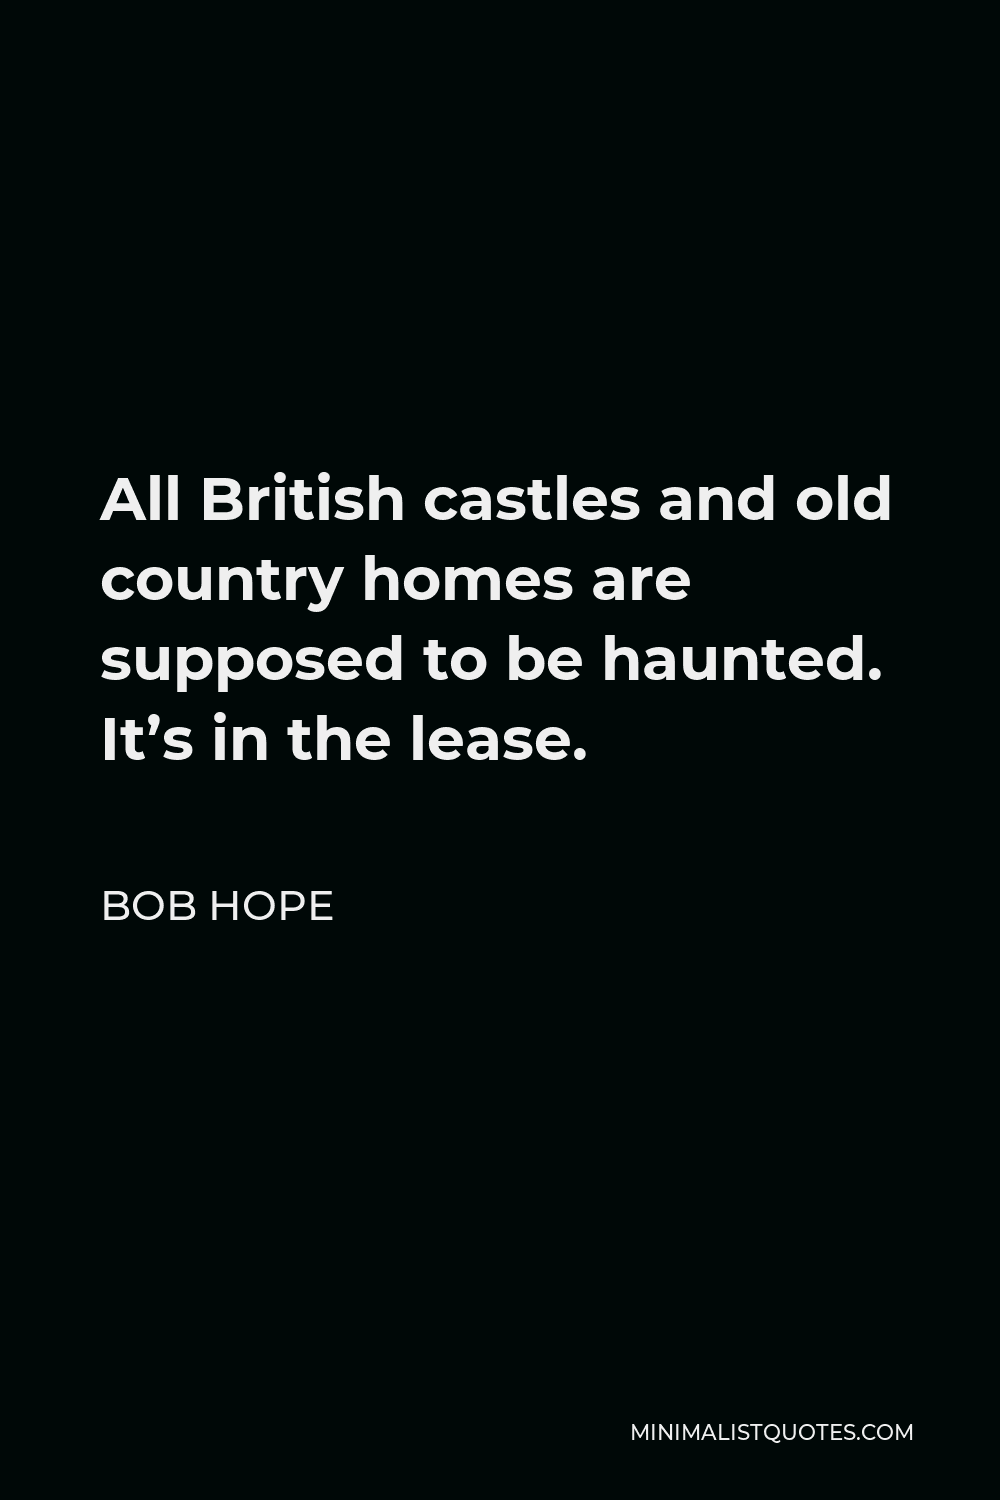 Bob Hope Quote - All British castles and old country homes are supposed to be haunted. It’s in the lease.